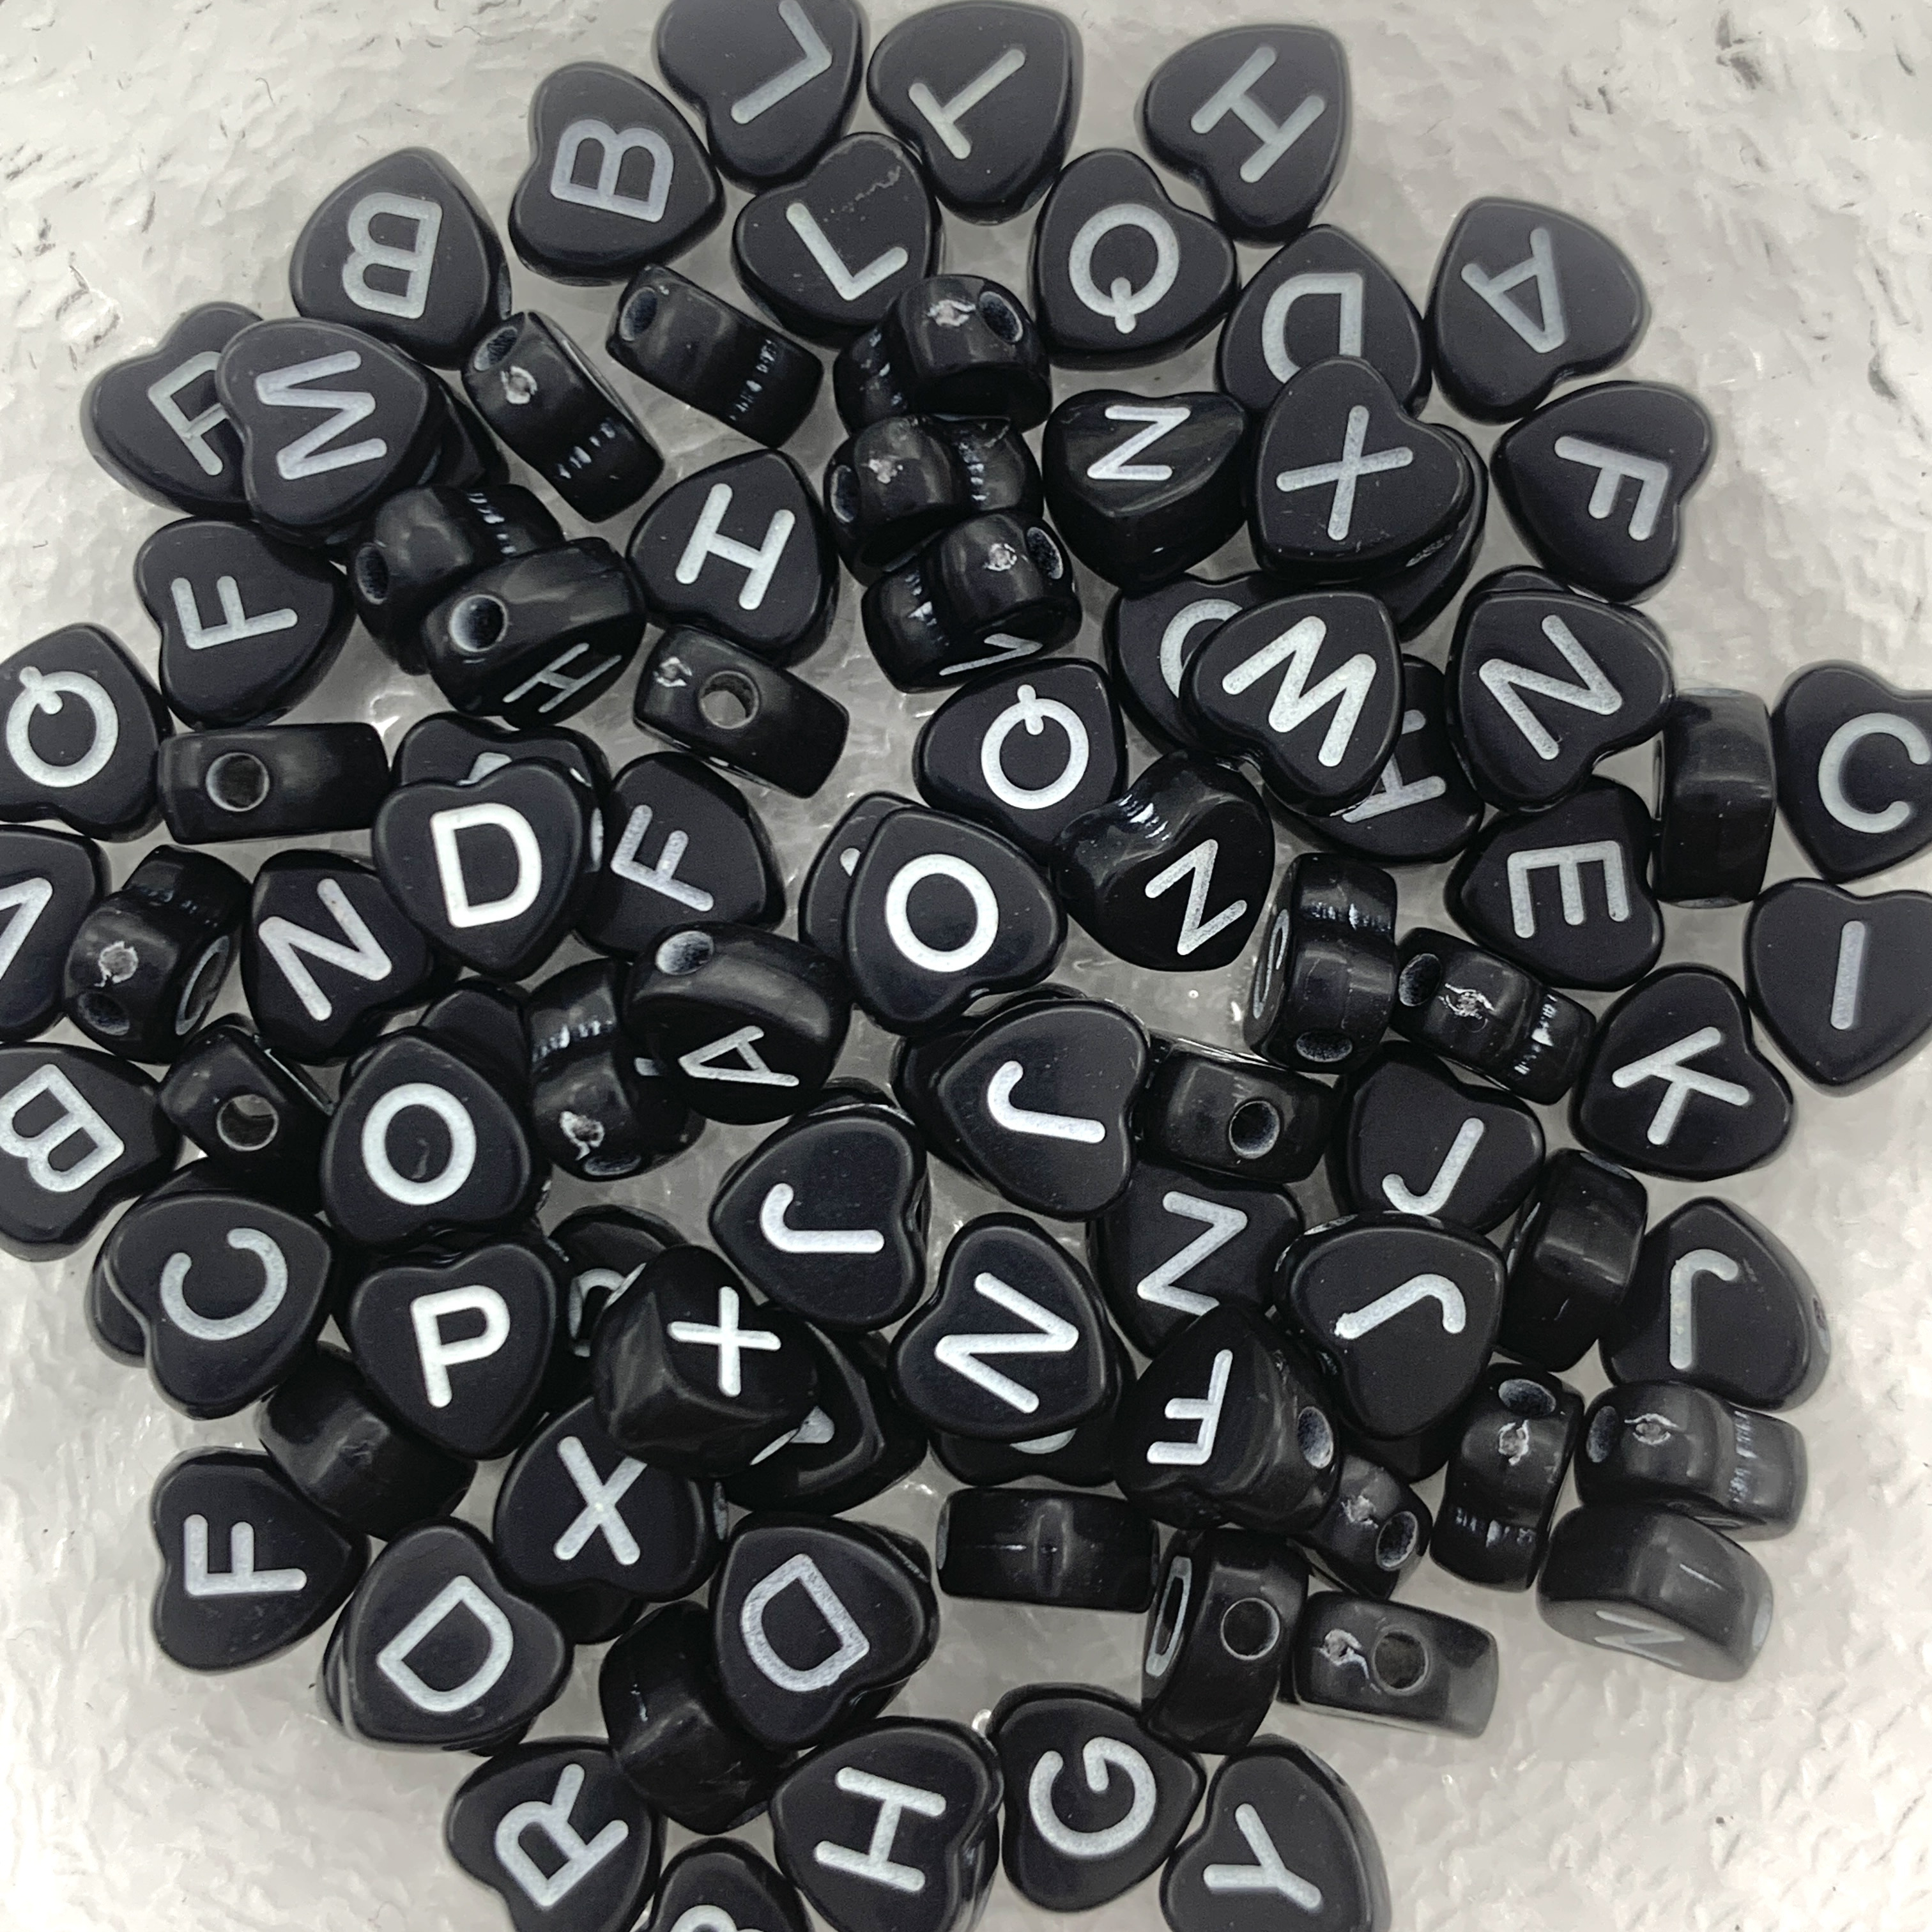 Black and White Cube Letter Beads Bracelet, Black and White Beads, Black  and White Alphabet Beads, Cube Alphabet Beads for Jewelry Making -   Hong Kong